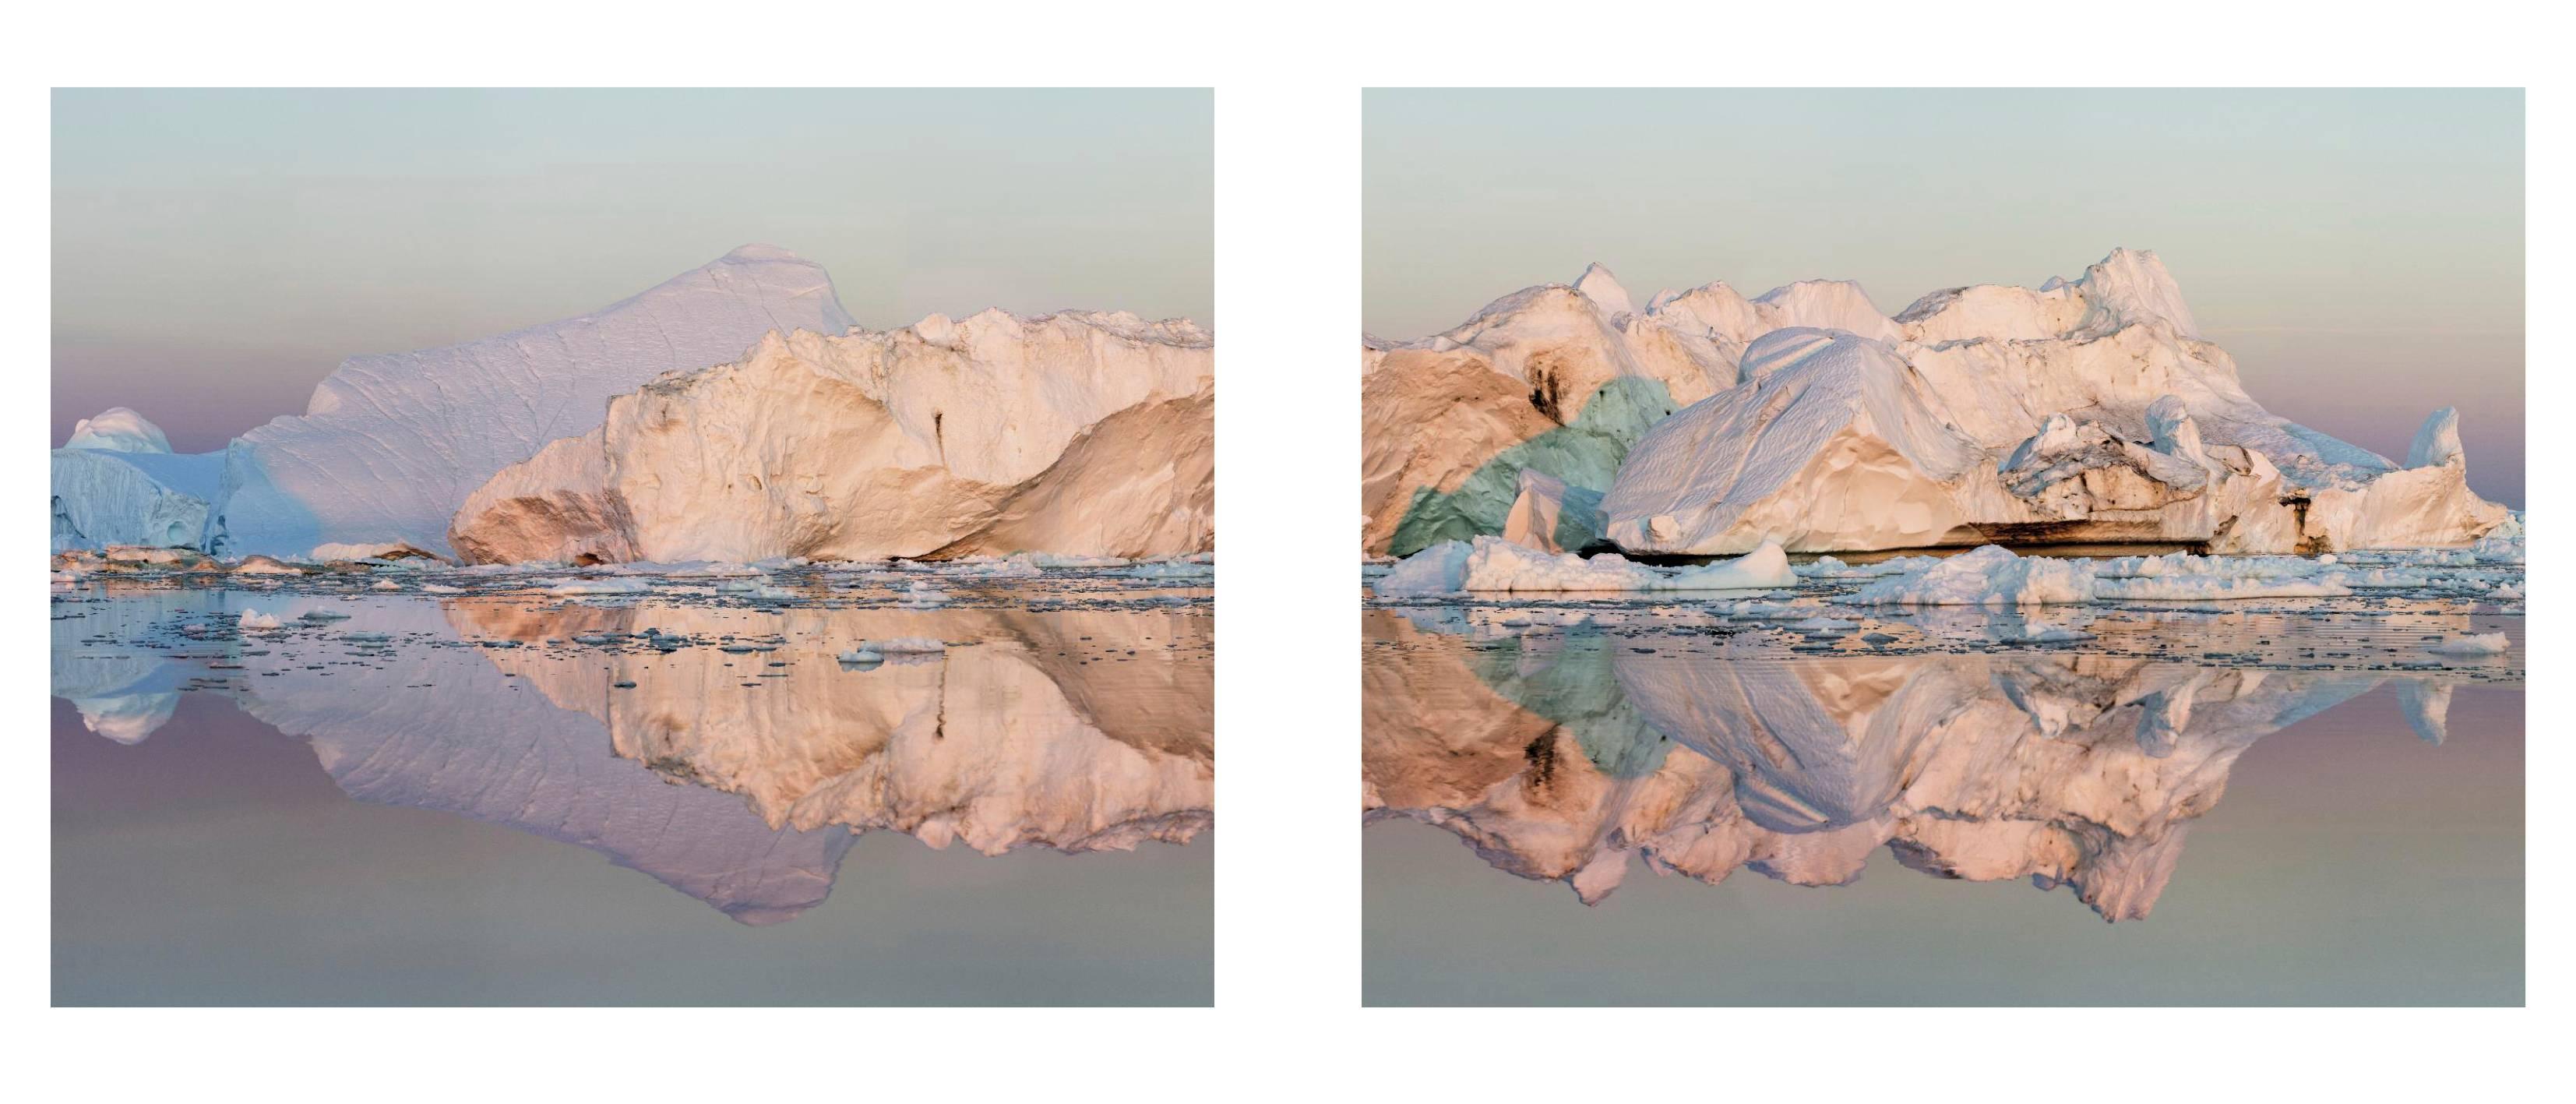 Ilulissat 13, Diptych, 07/2015 - Olaf Otto Becker (Landscape Colour Photography)
Signed on reverse
Archival pigment print

Available in four sizes:
25 x 29.5 inches each, from an edition of six
43.75 x 52.5 inches each, from an edition of seven
58.5